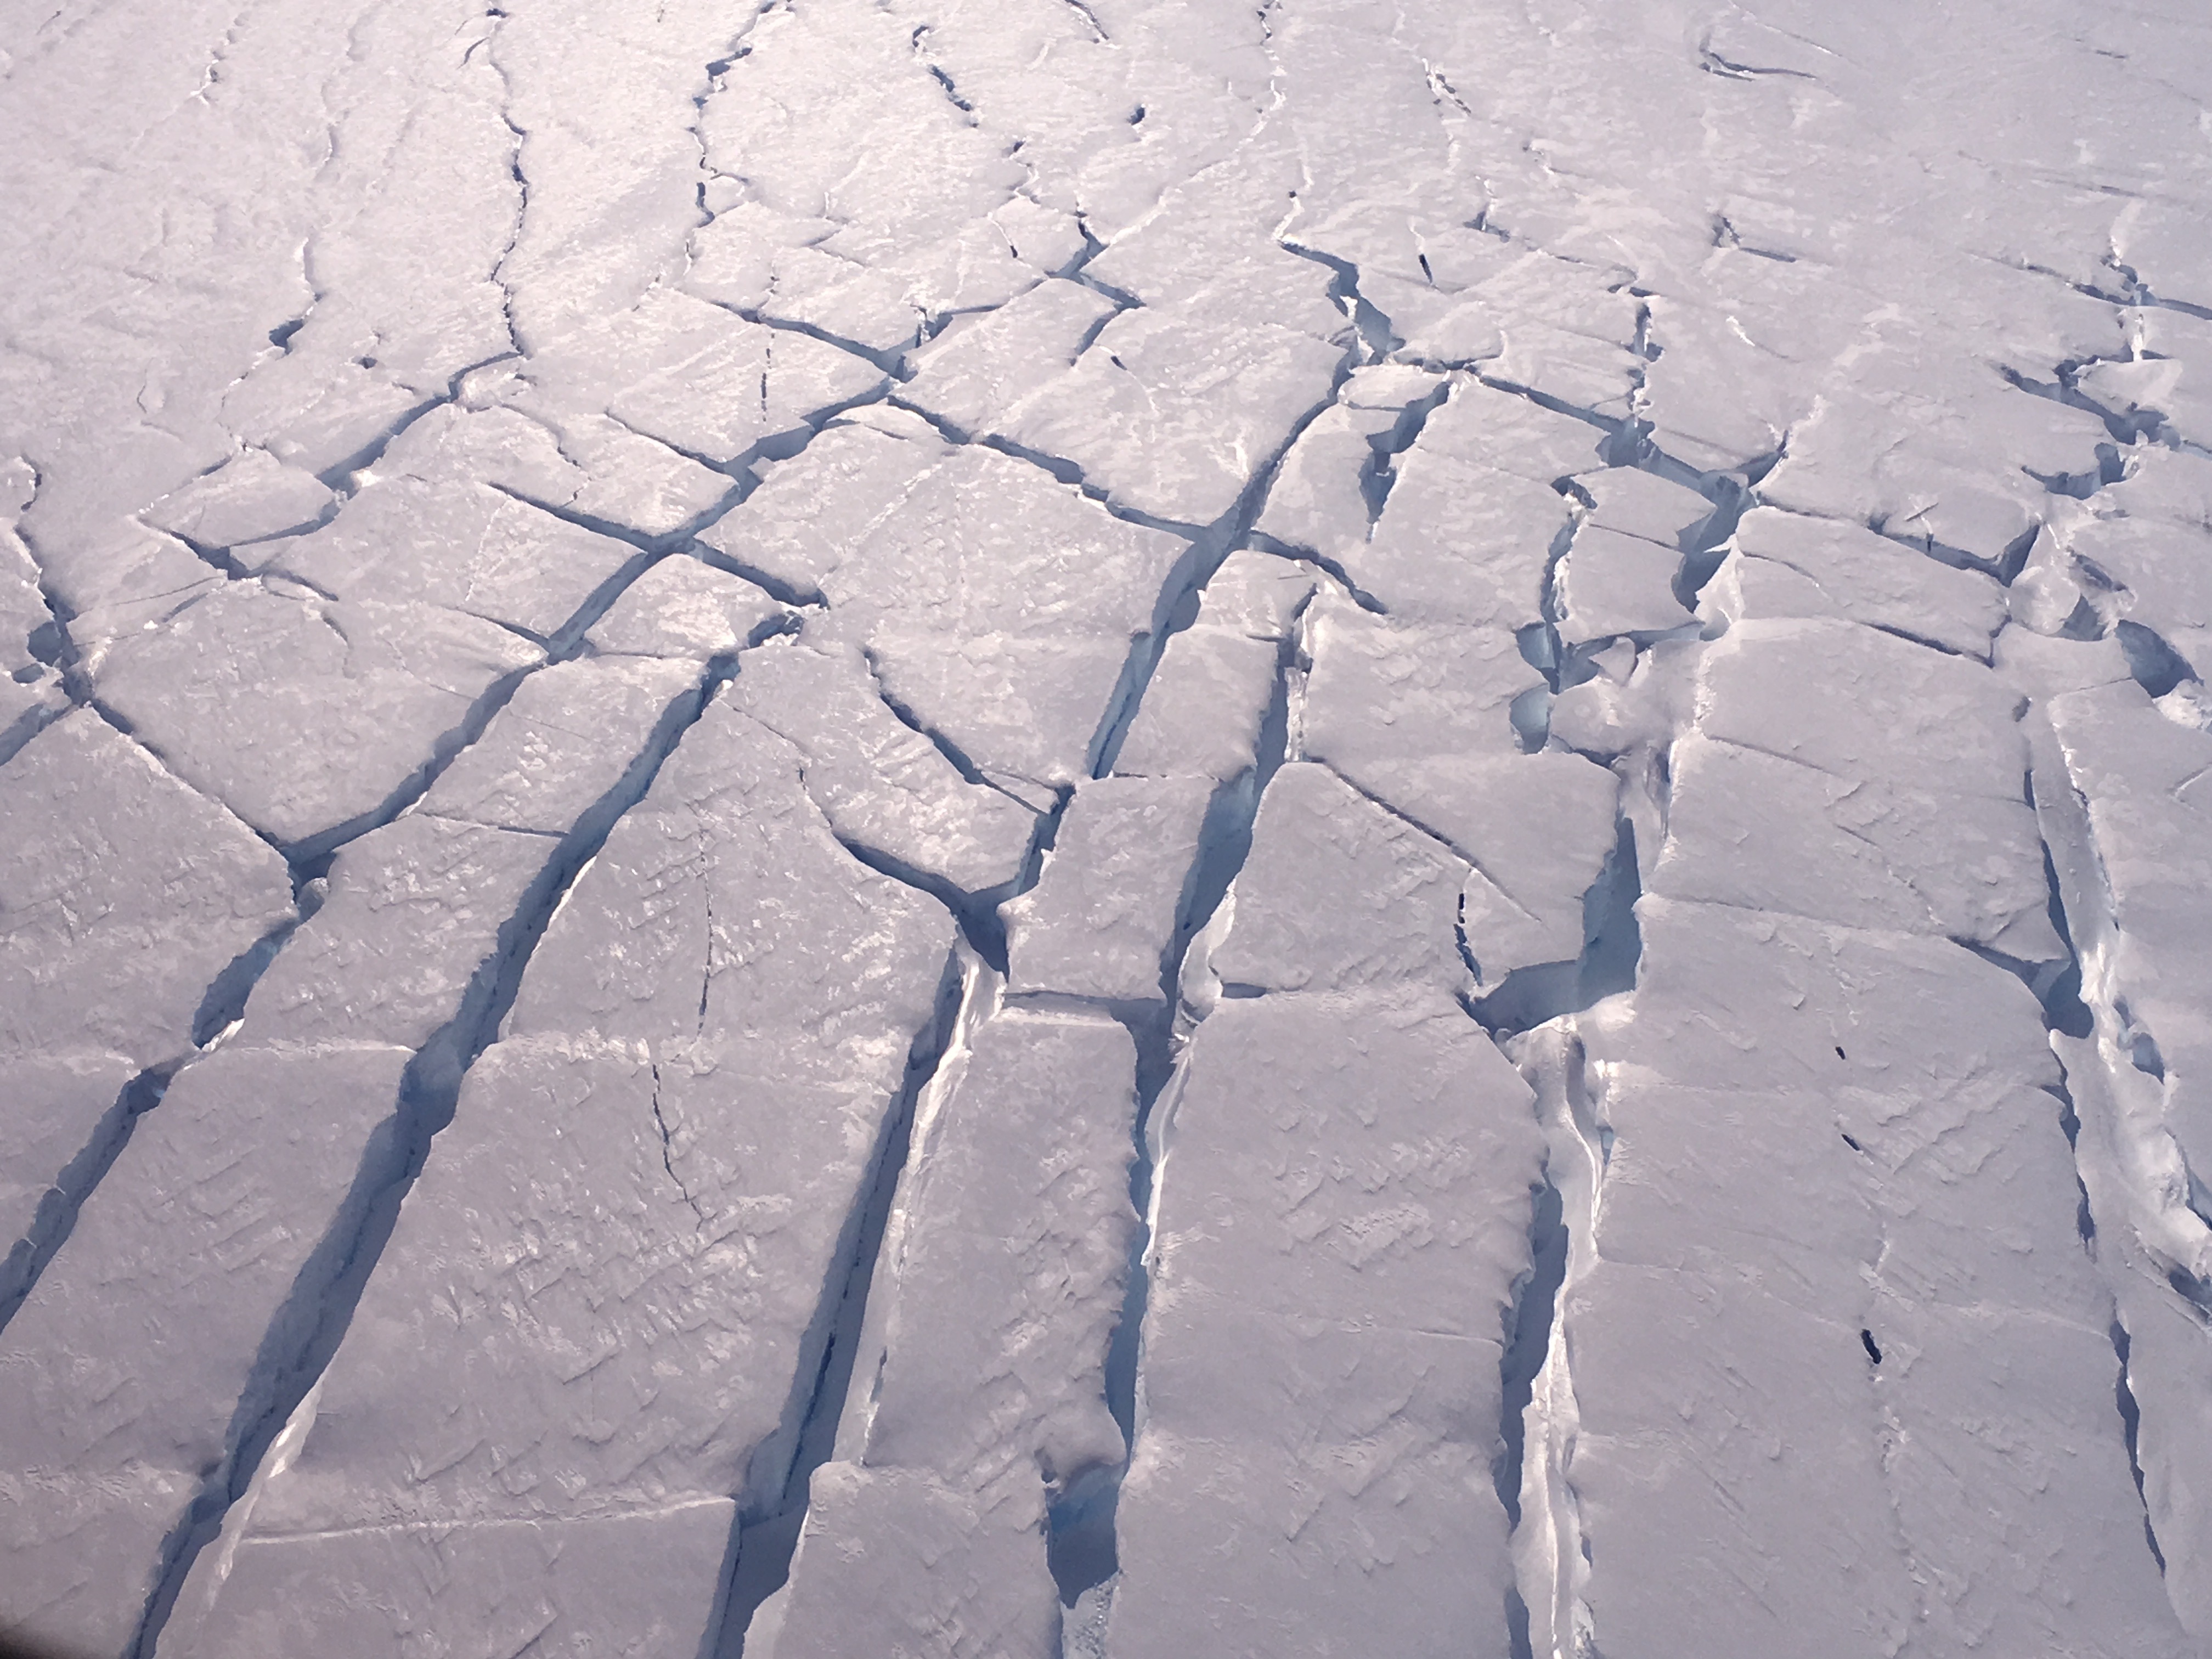 Cracks in the ice of Thwaites Glacier as seen from the air in 2020. Credit: Icefin / ITGC / Schmidt